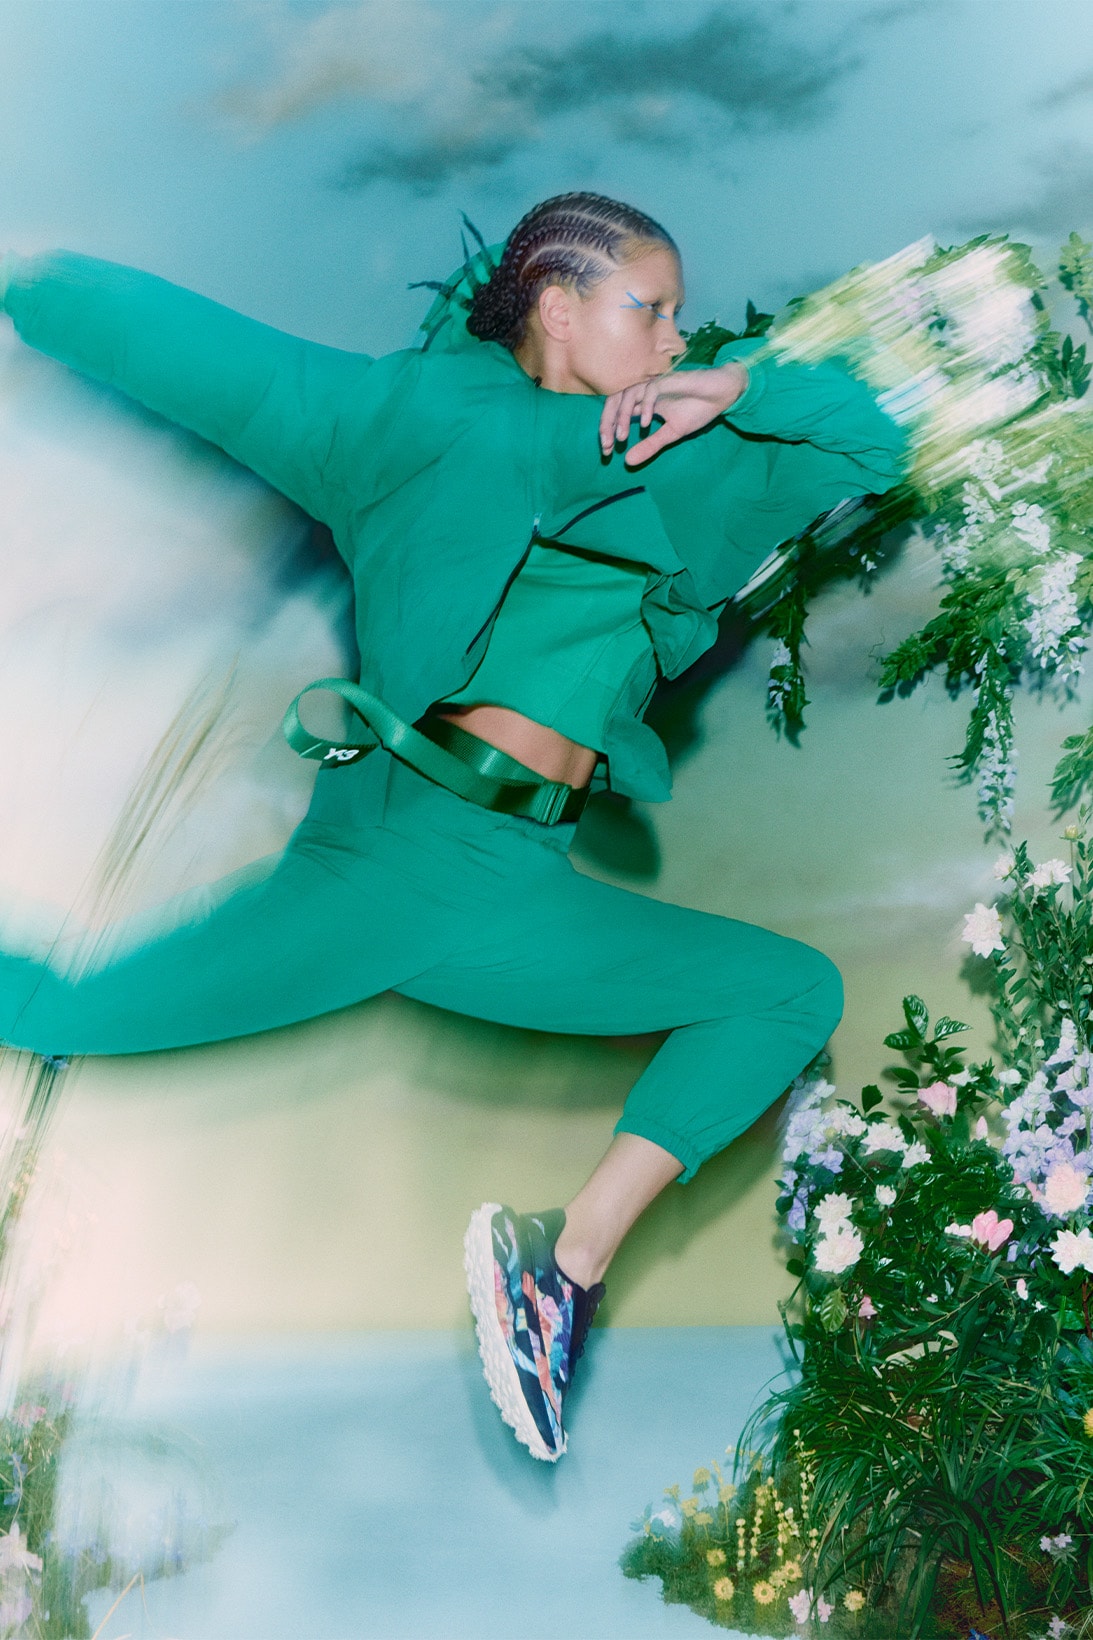 y-3 spring summer collection chapter 2 sneakers accessories release info green sweatsuit women